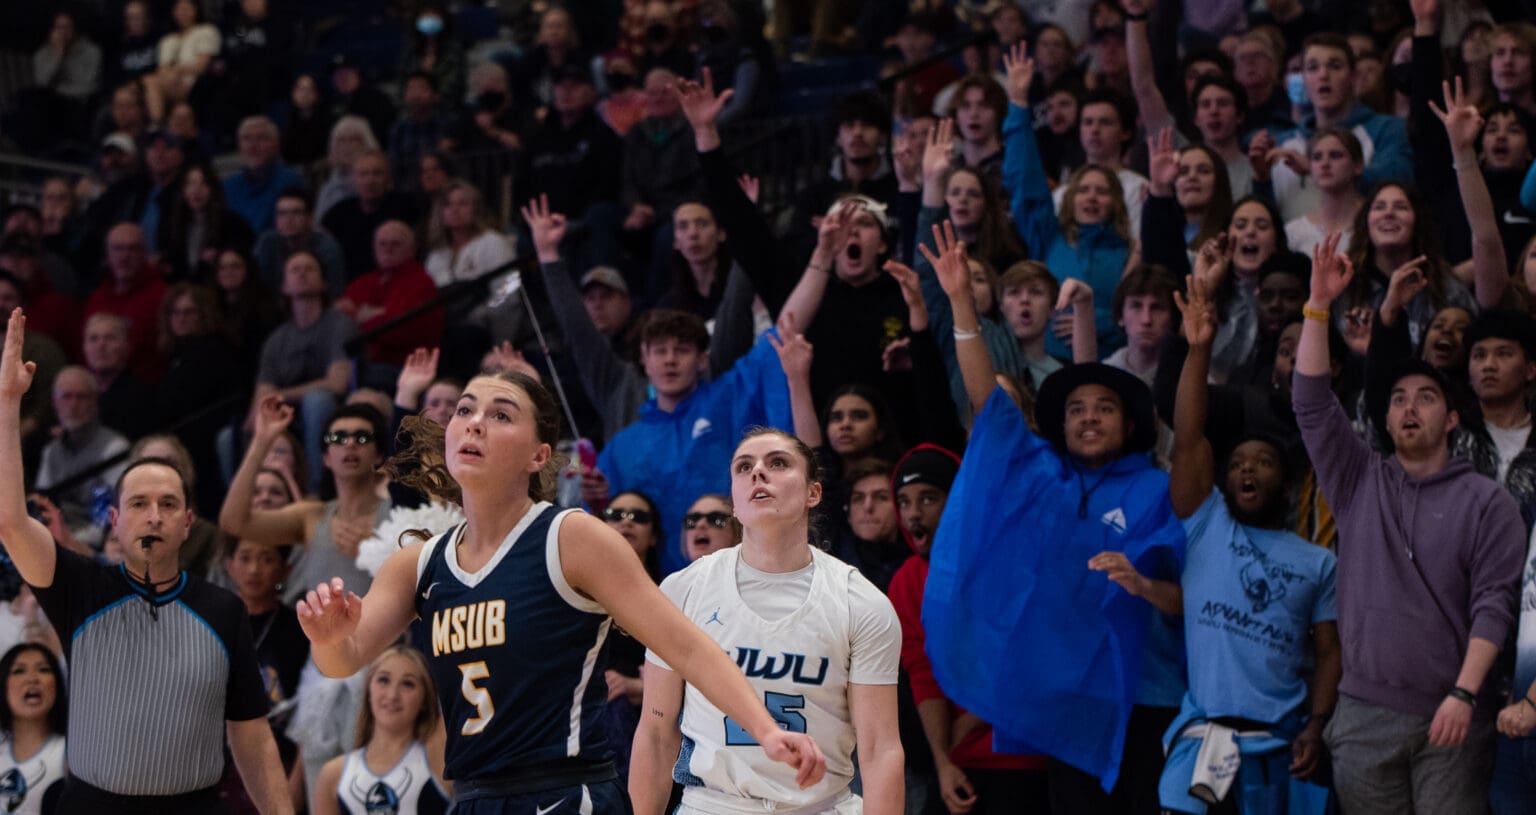 Western's fans react as Maddy Grandbois hits a 3-pointer as both players watch to see if the ball goes through.